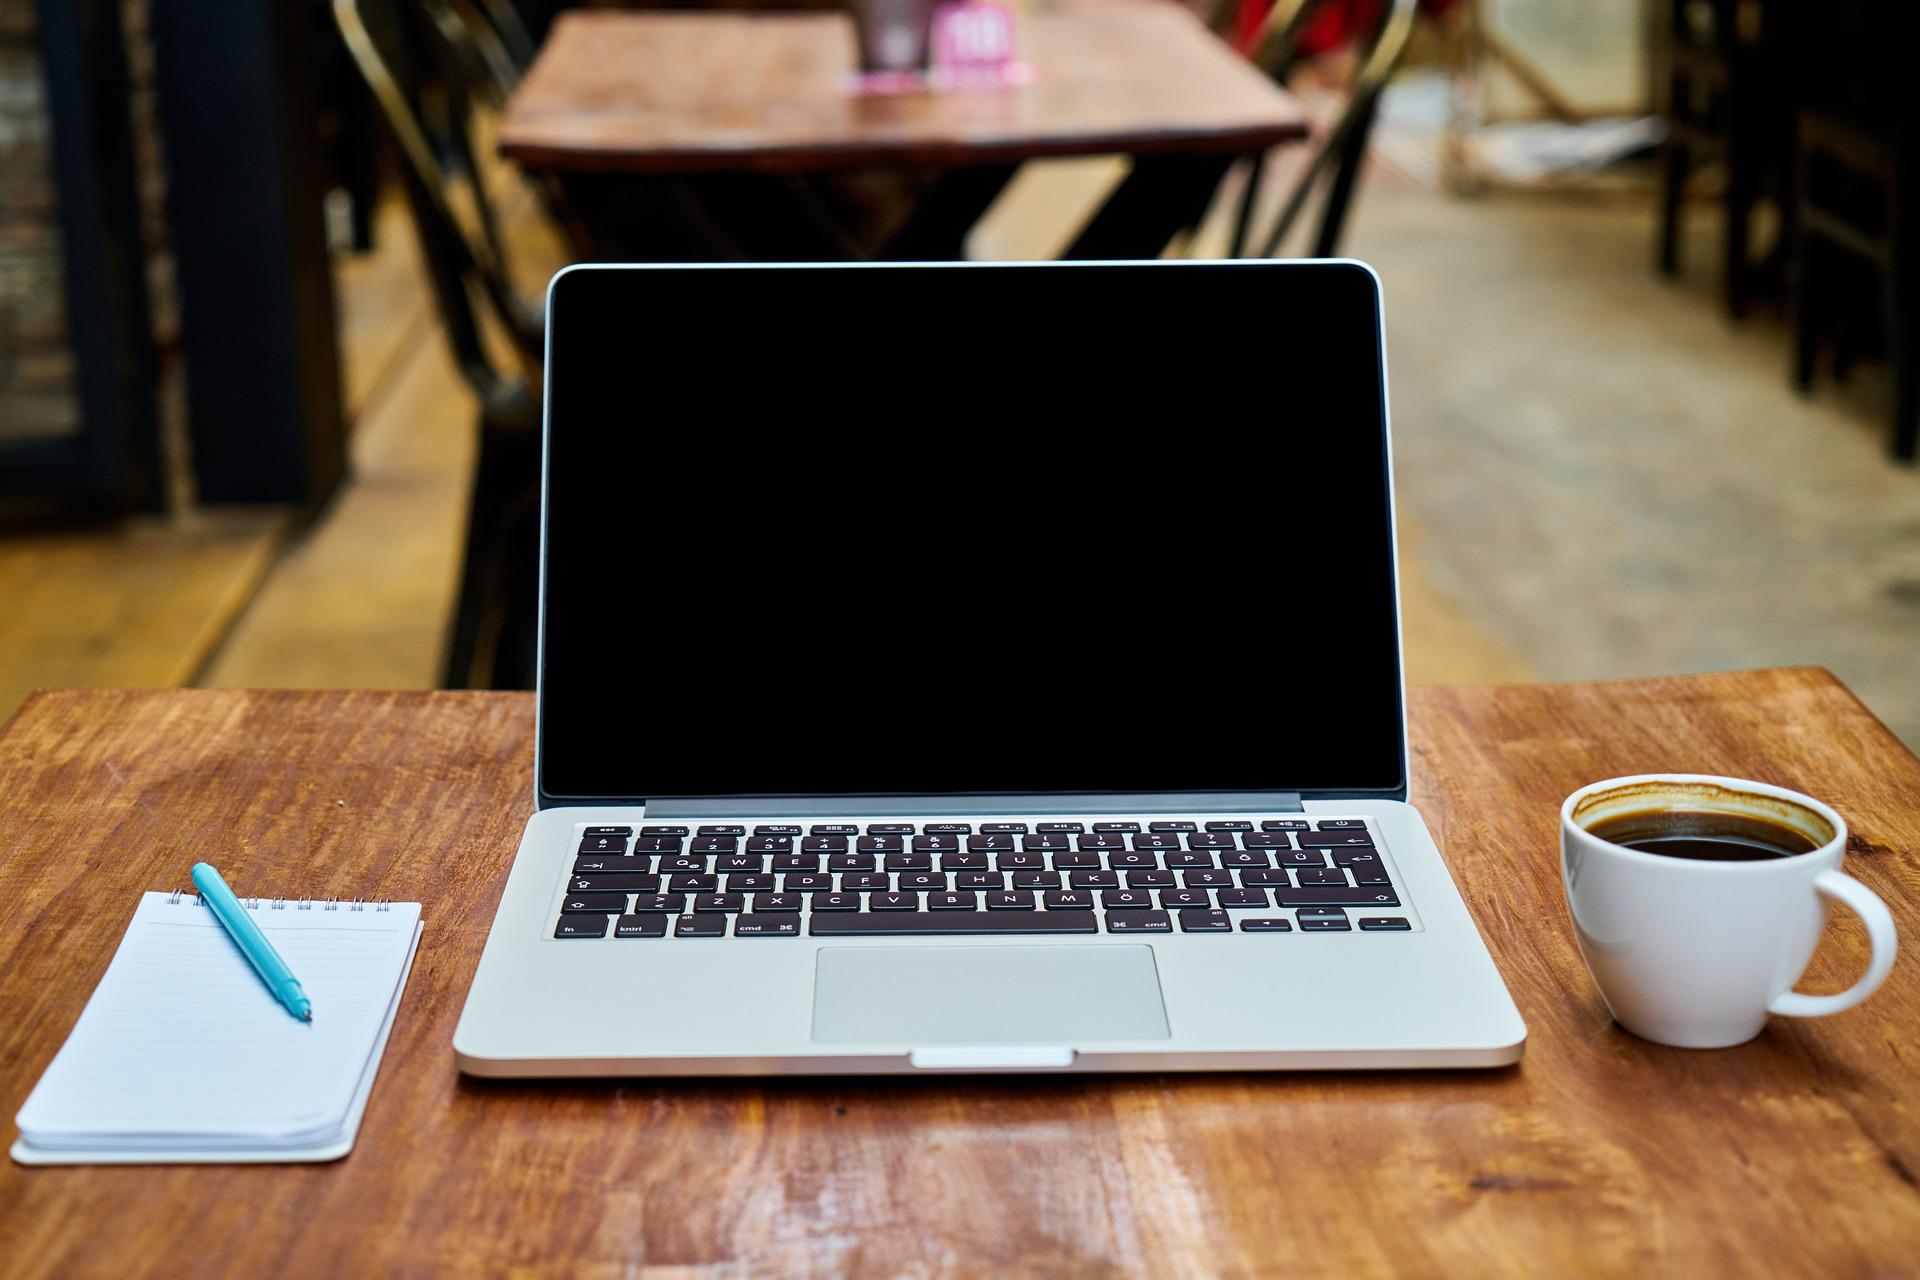 An open laptop, with a notebook and pen on the left and a coffee mug on the right.